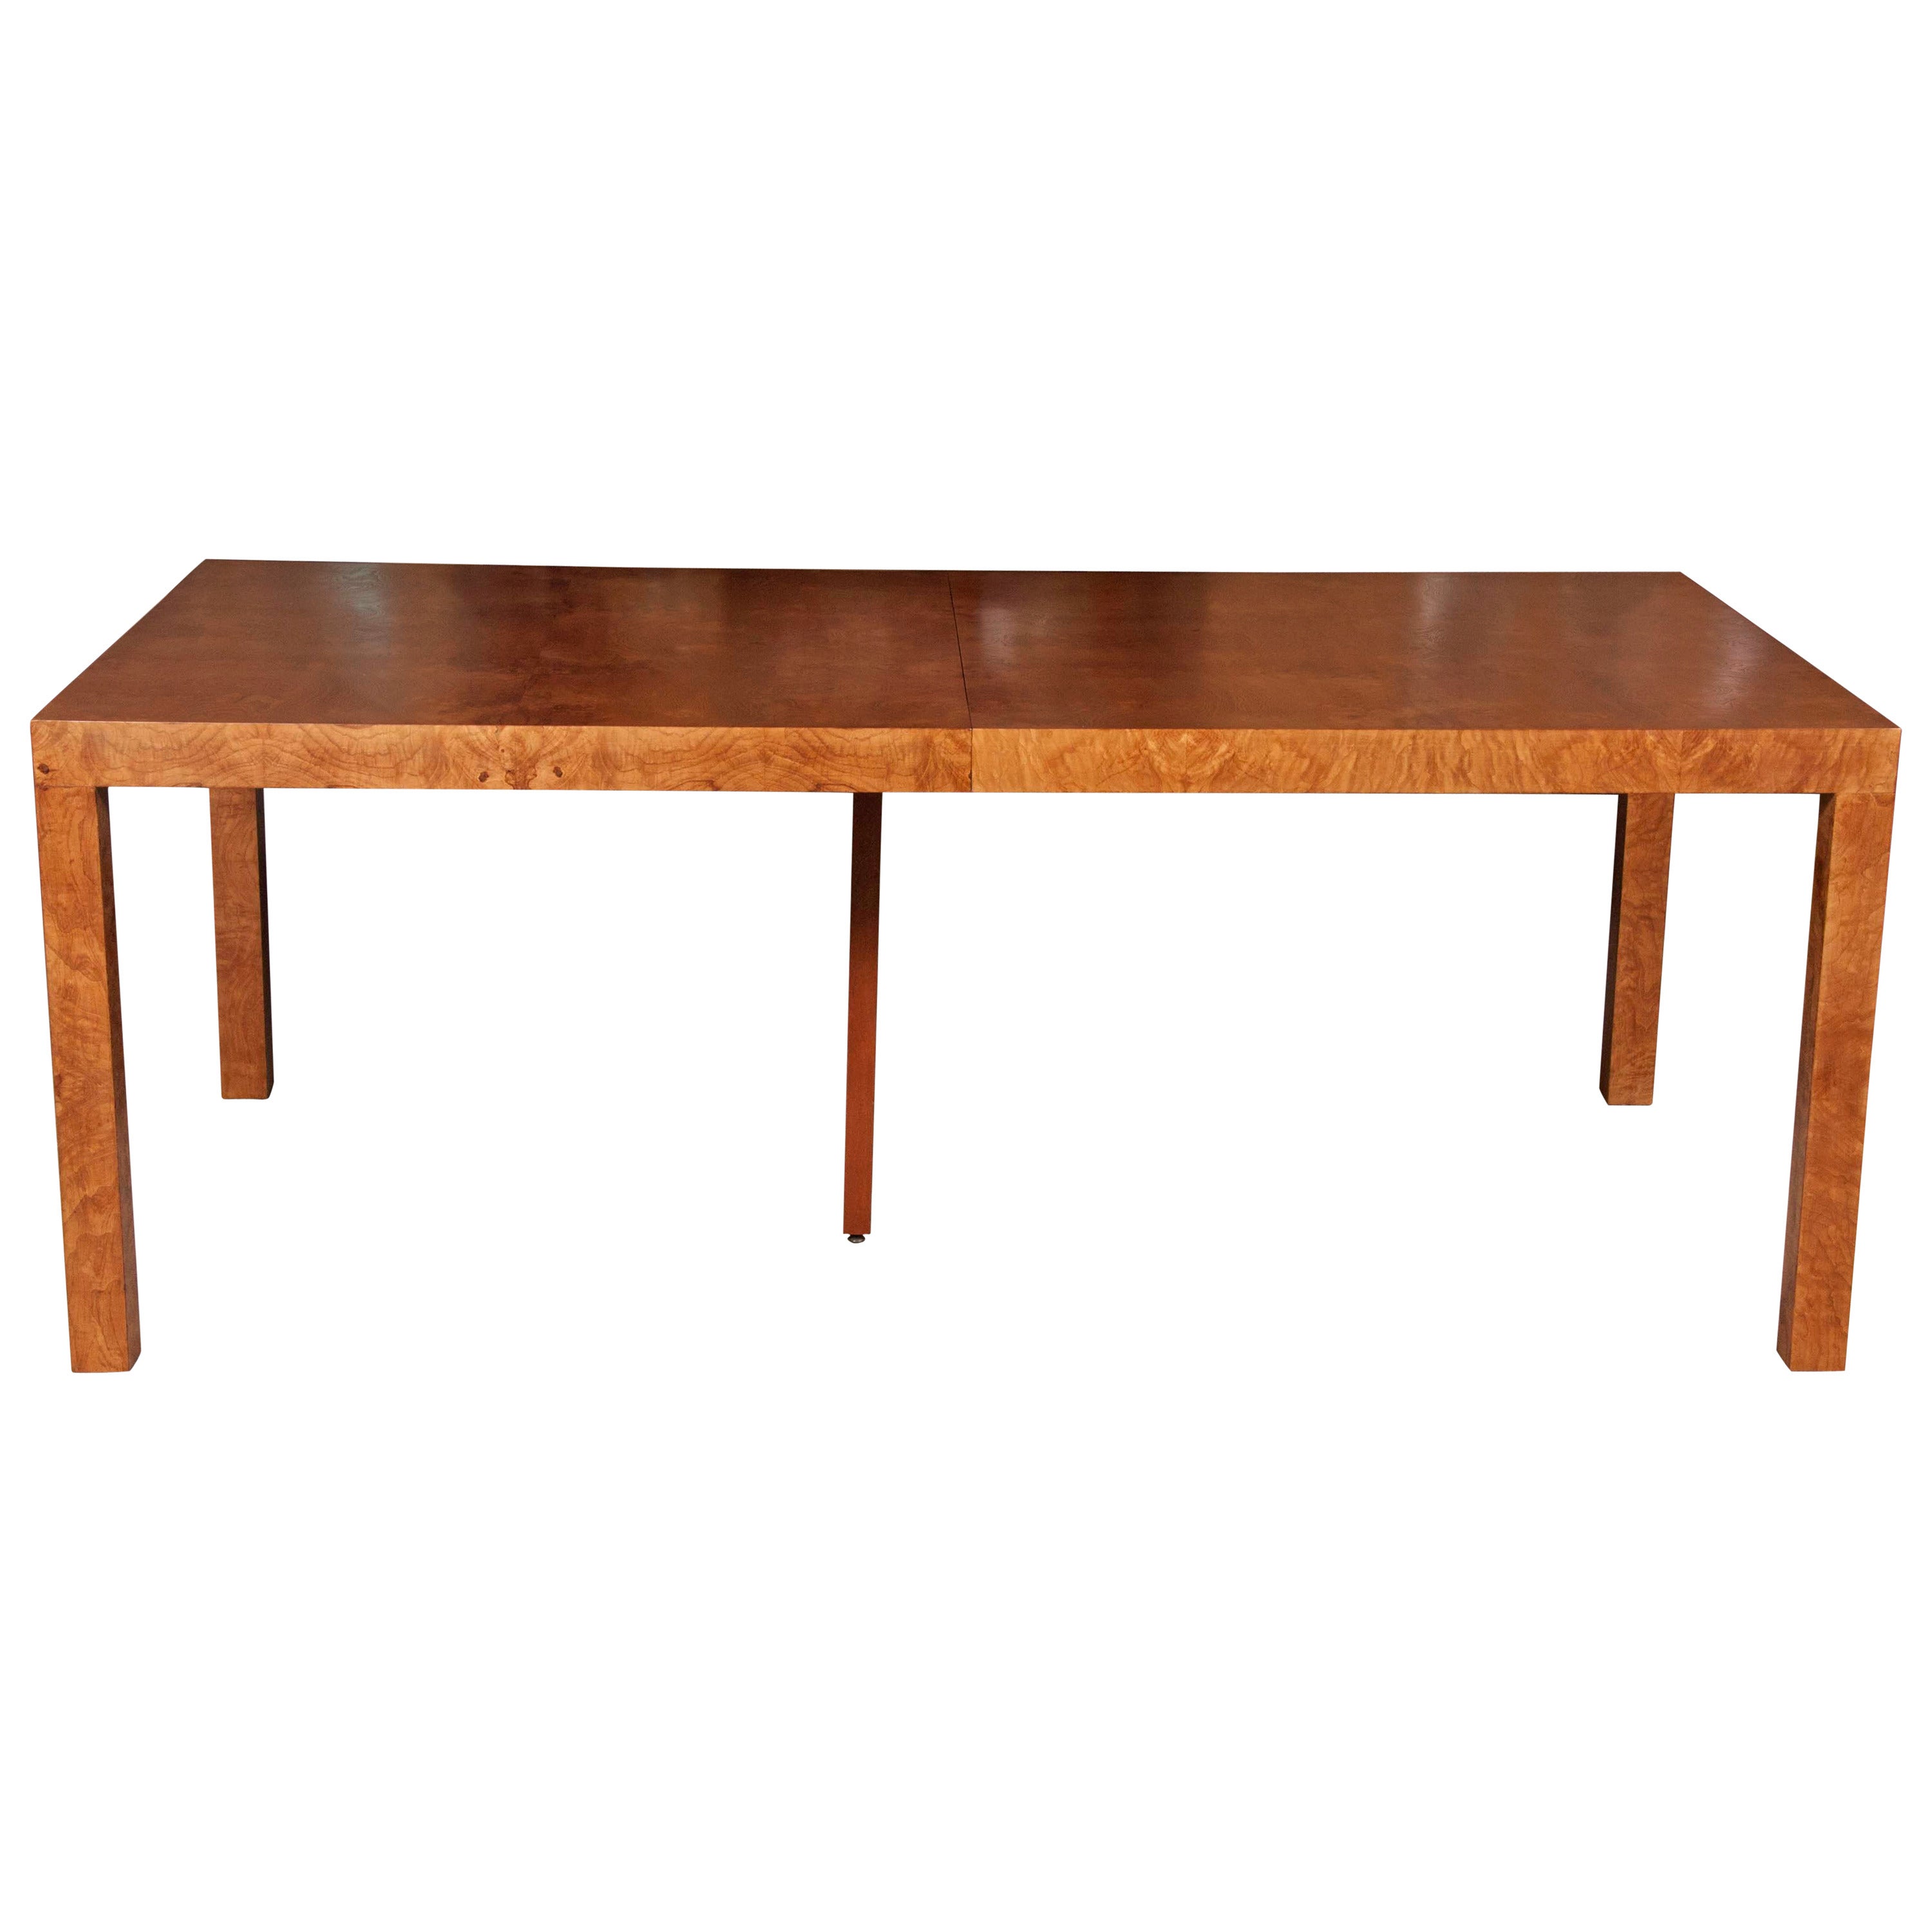 A Parsons Dining Table designed by Milo Baughman for Directional